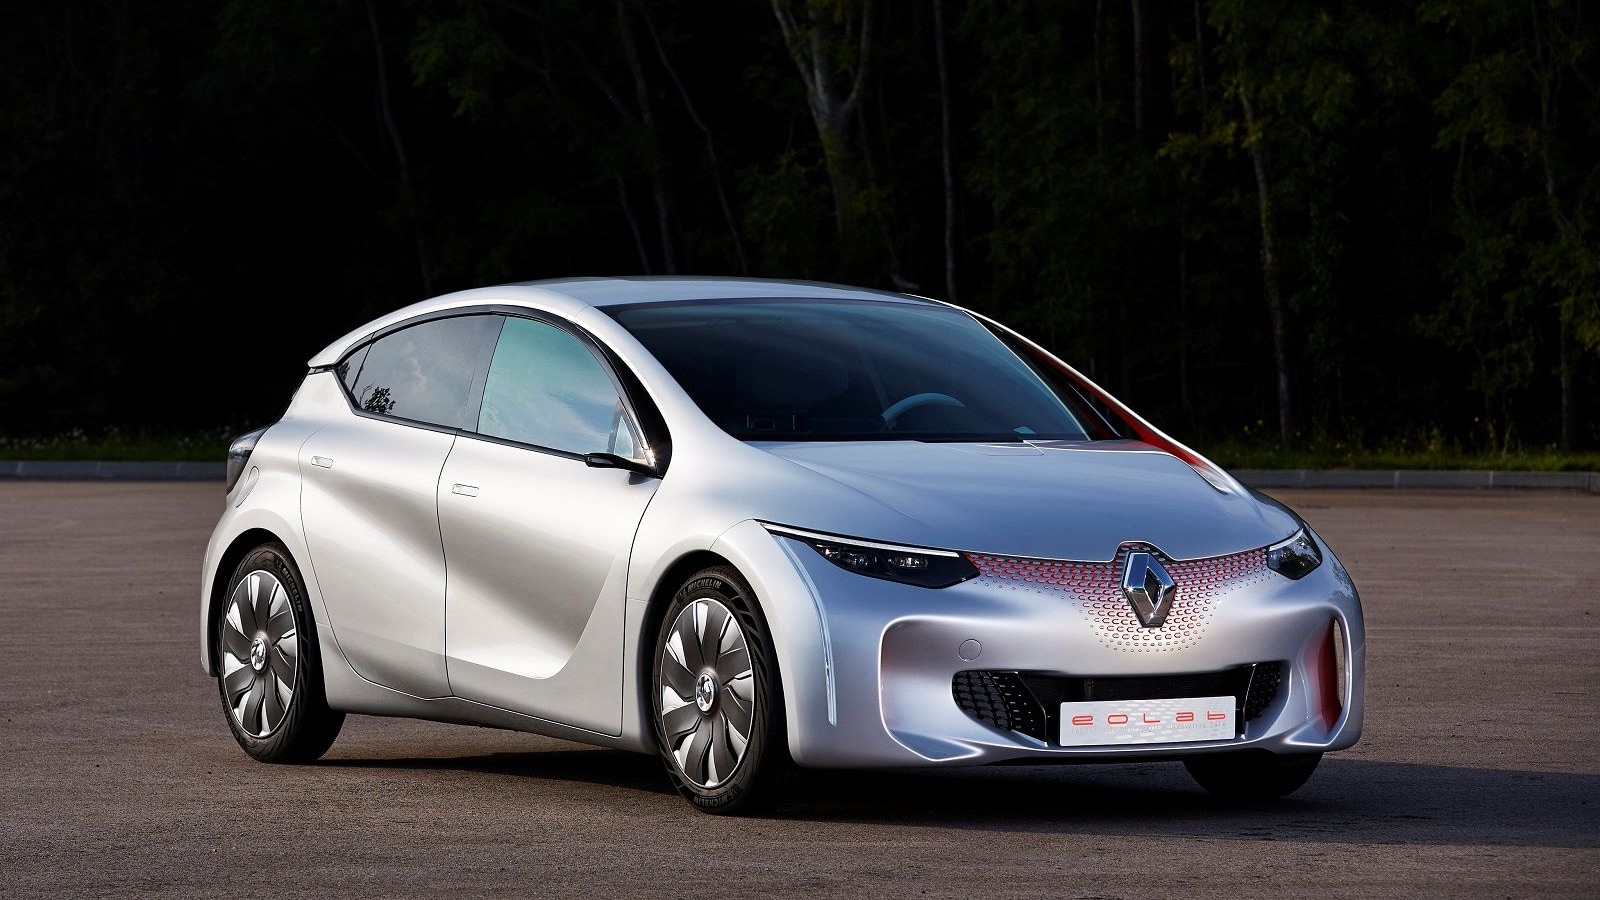 Renault Eolab Concept for future plug-in hybrid vehicle, 2014 Paris Motor Show